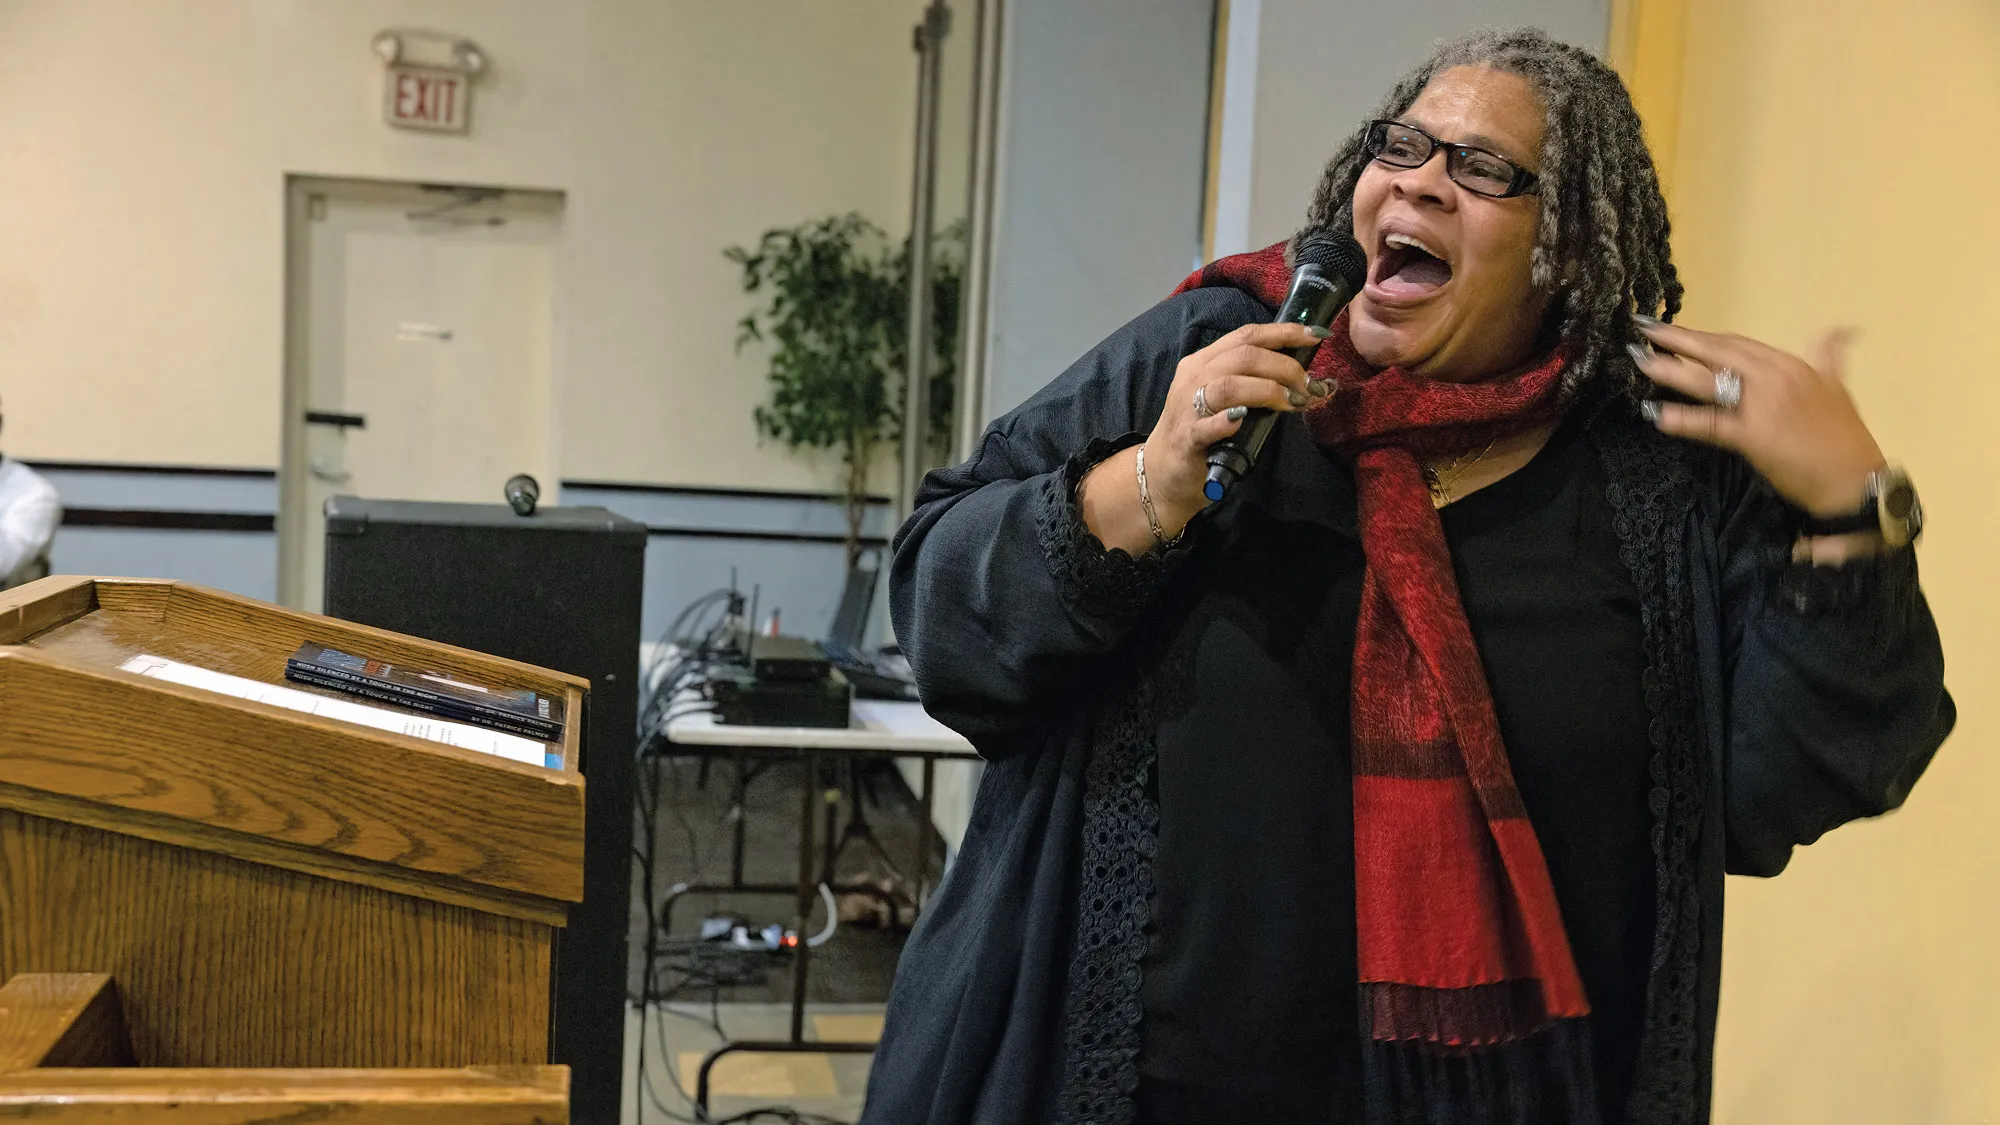 Holding a mic and dressed in flowing clothes with a vibrant scarf, Patrice Palmer gestures as she tells her story. The photograph caught her mid-movement, so she looks like she is stepping forward as she speaks to an audience out of the photo. 